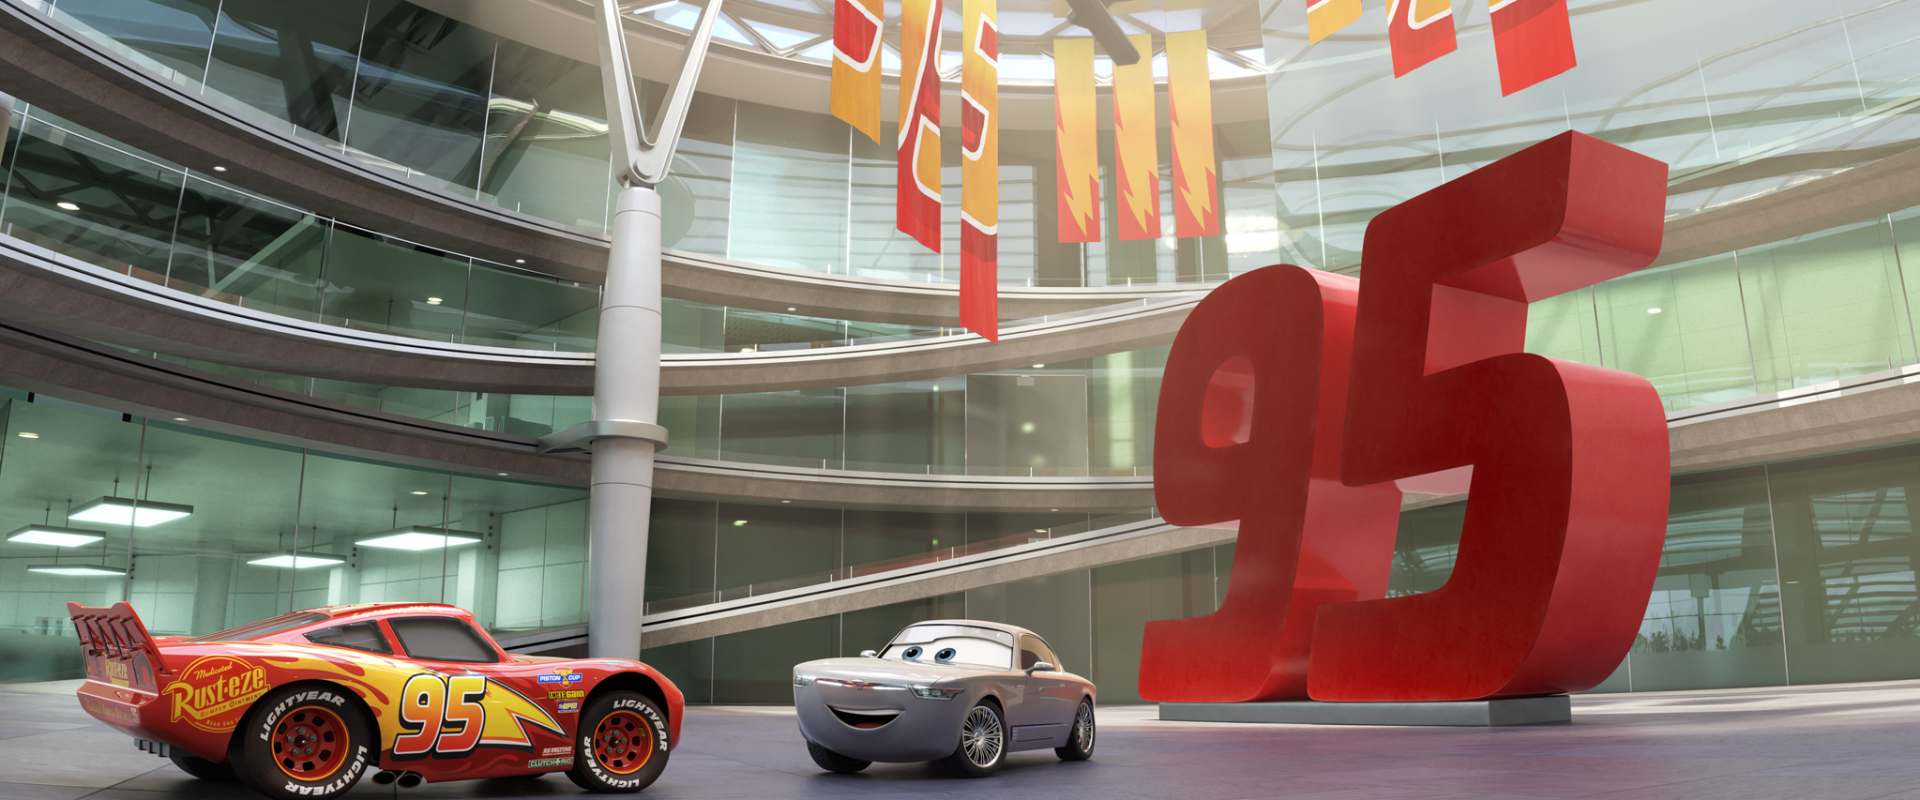 Cars 3 background 2